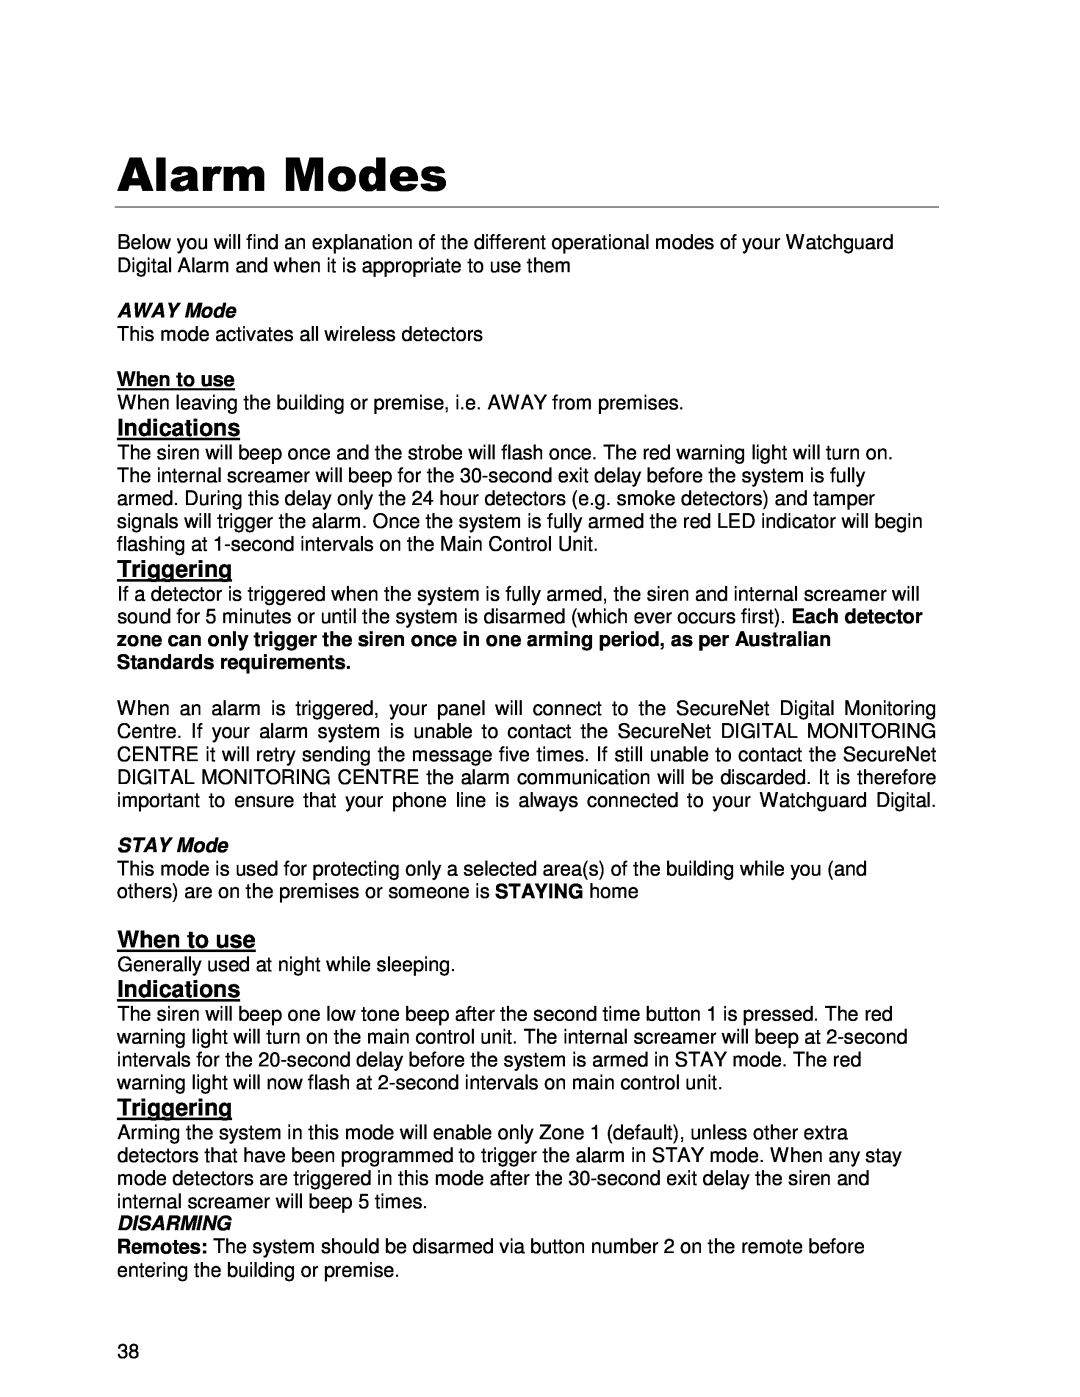 Ironman Fitness V2 instruction manual Indications, Triggering, When to use, AWAY Mode, STAY Mode, Disarming 